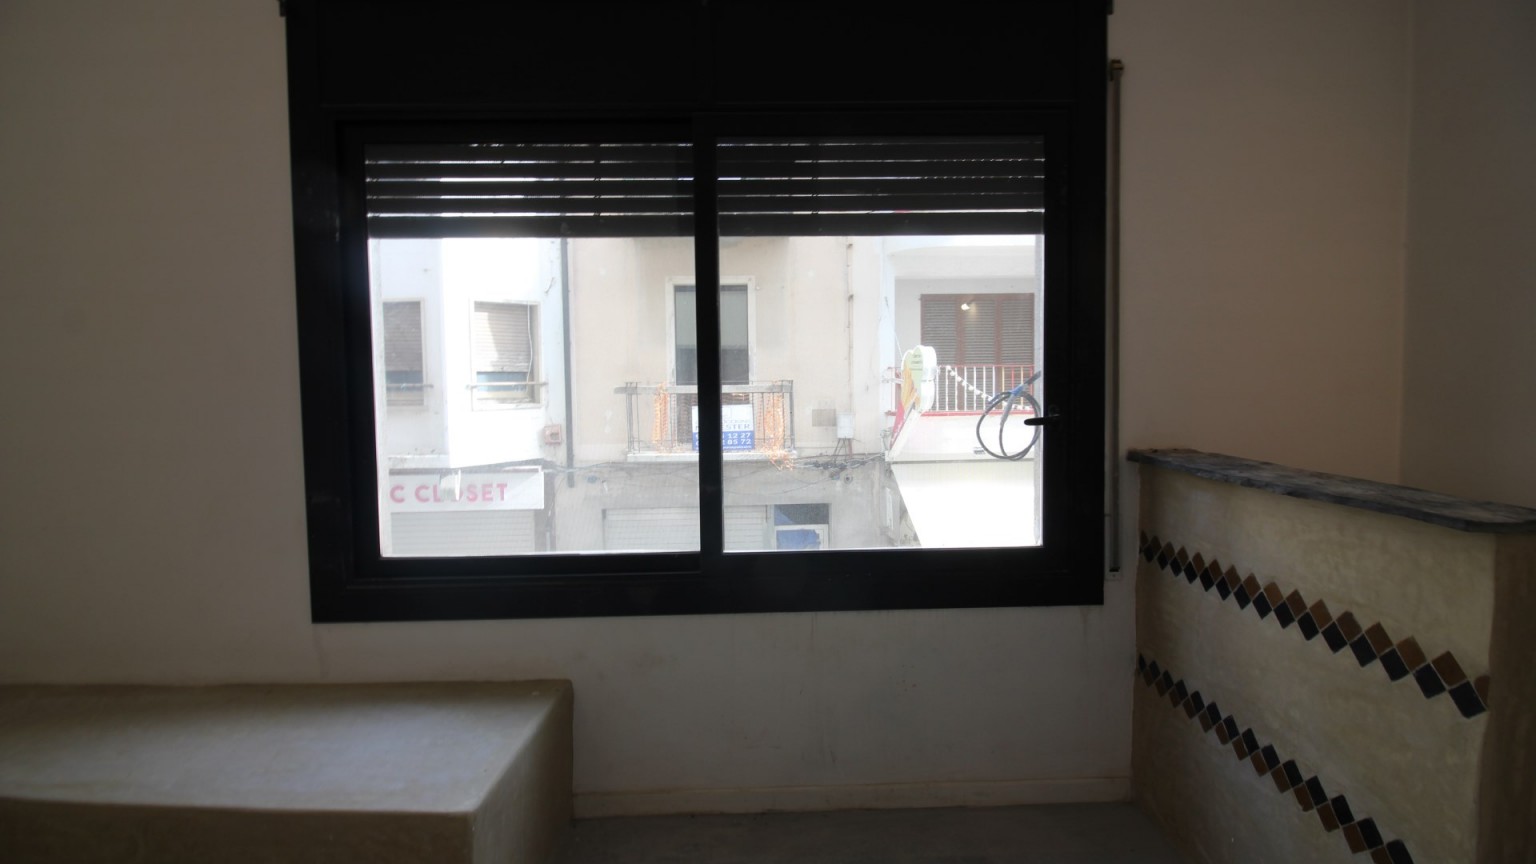 Premises for rent, on first floor, very well located. Ideal for beauty center.